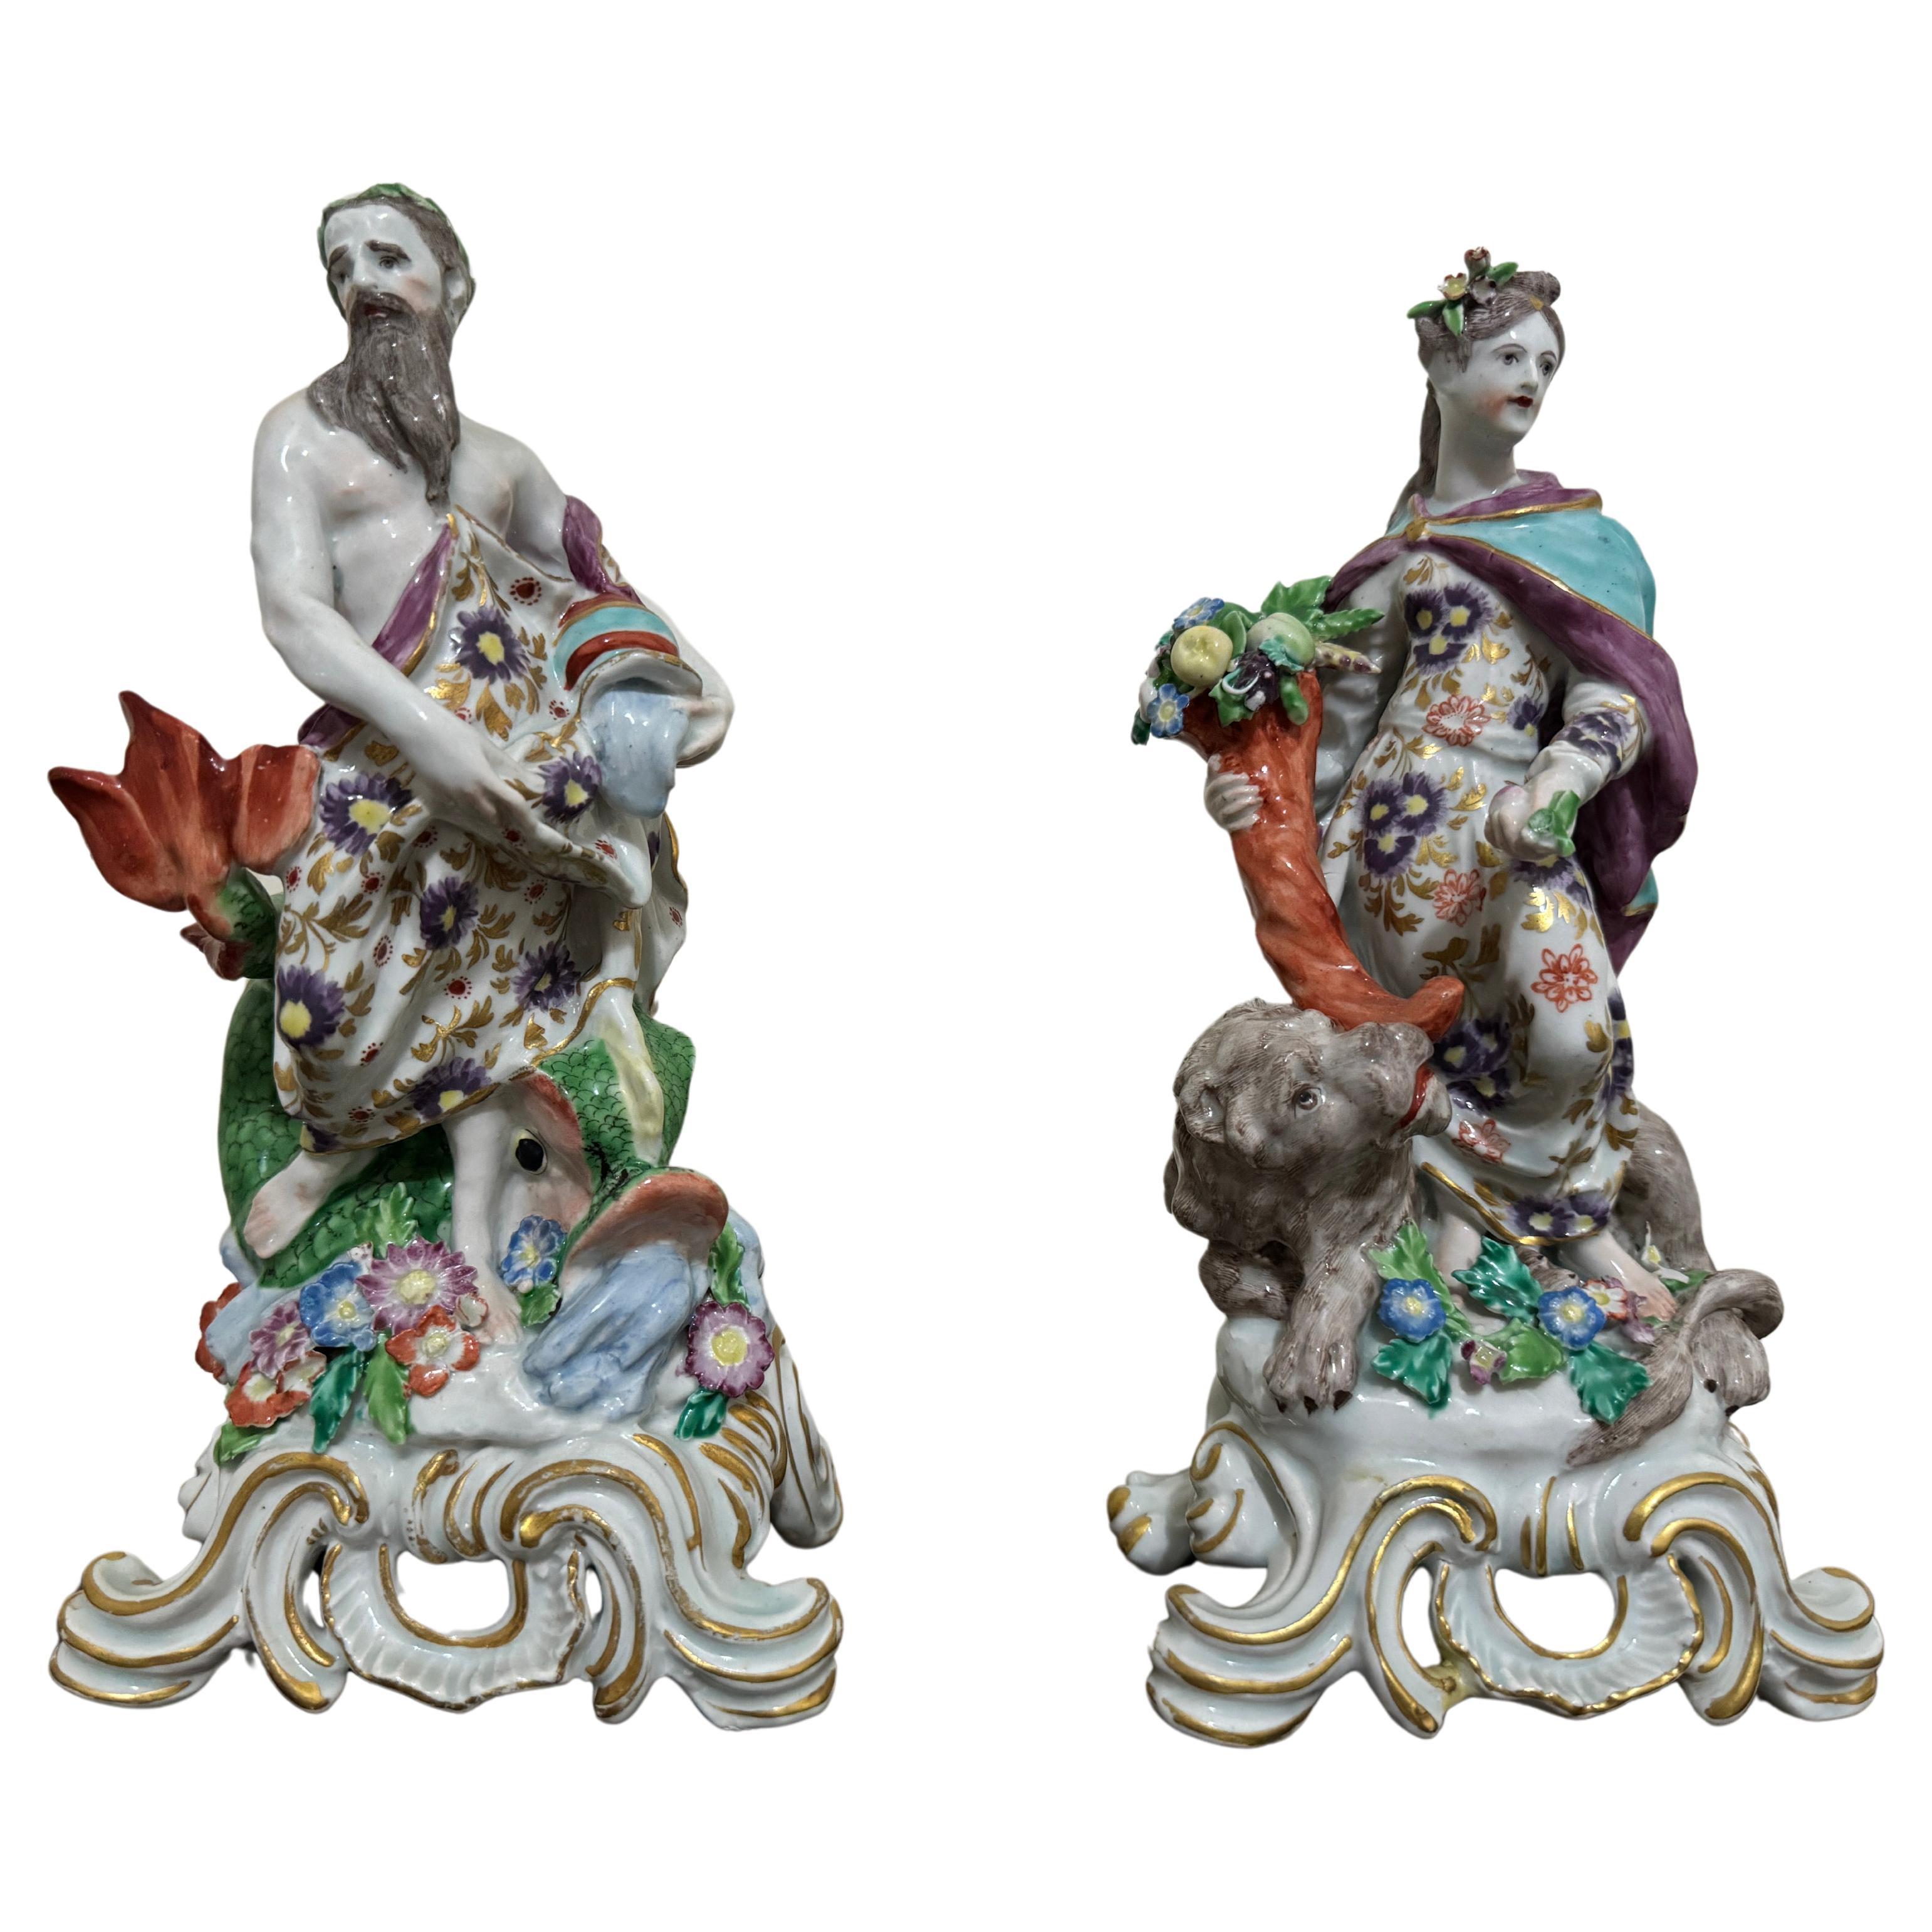 Pair of Bow Porcelain Element Figures, "Water" and "Land" , circa 1765